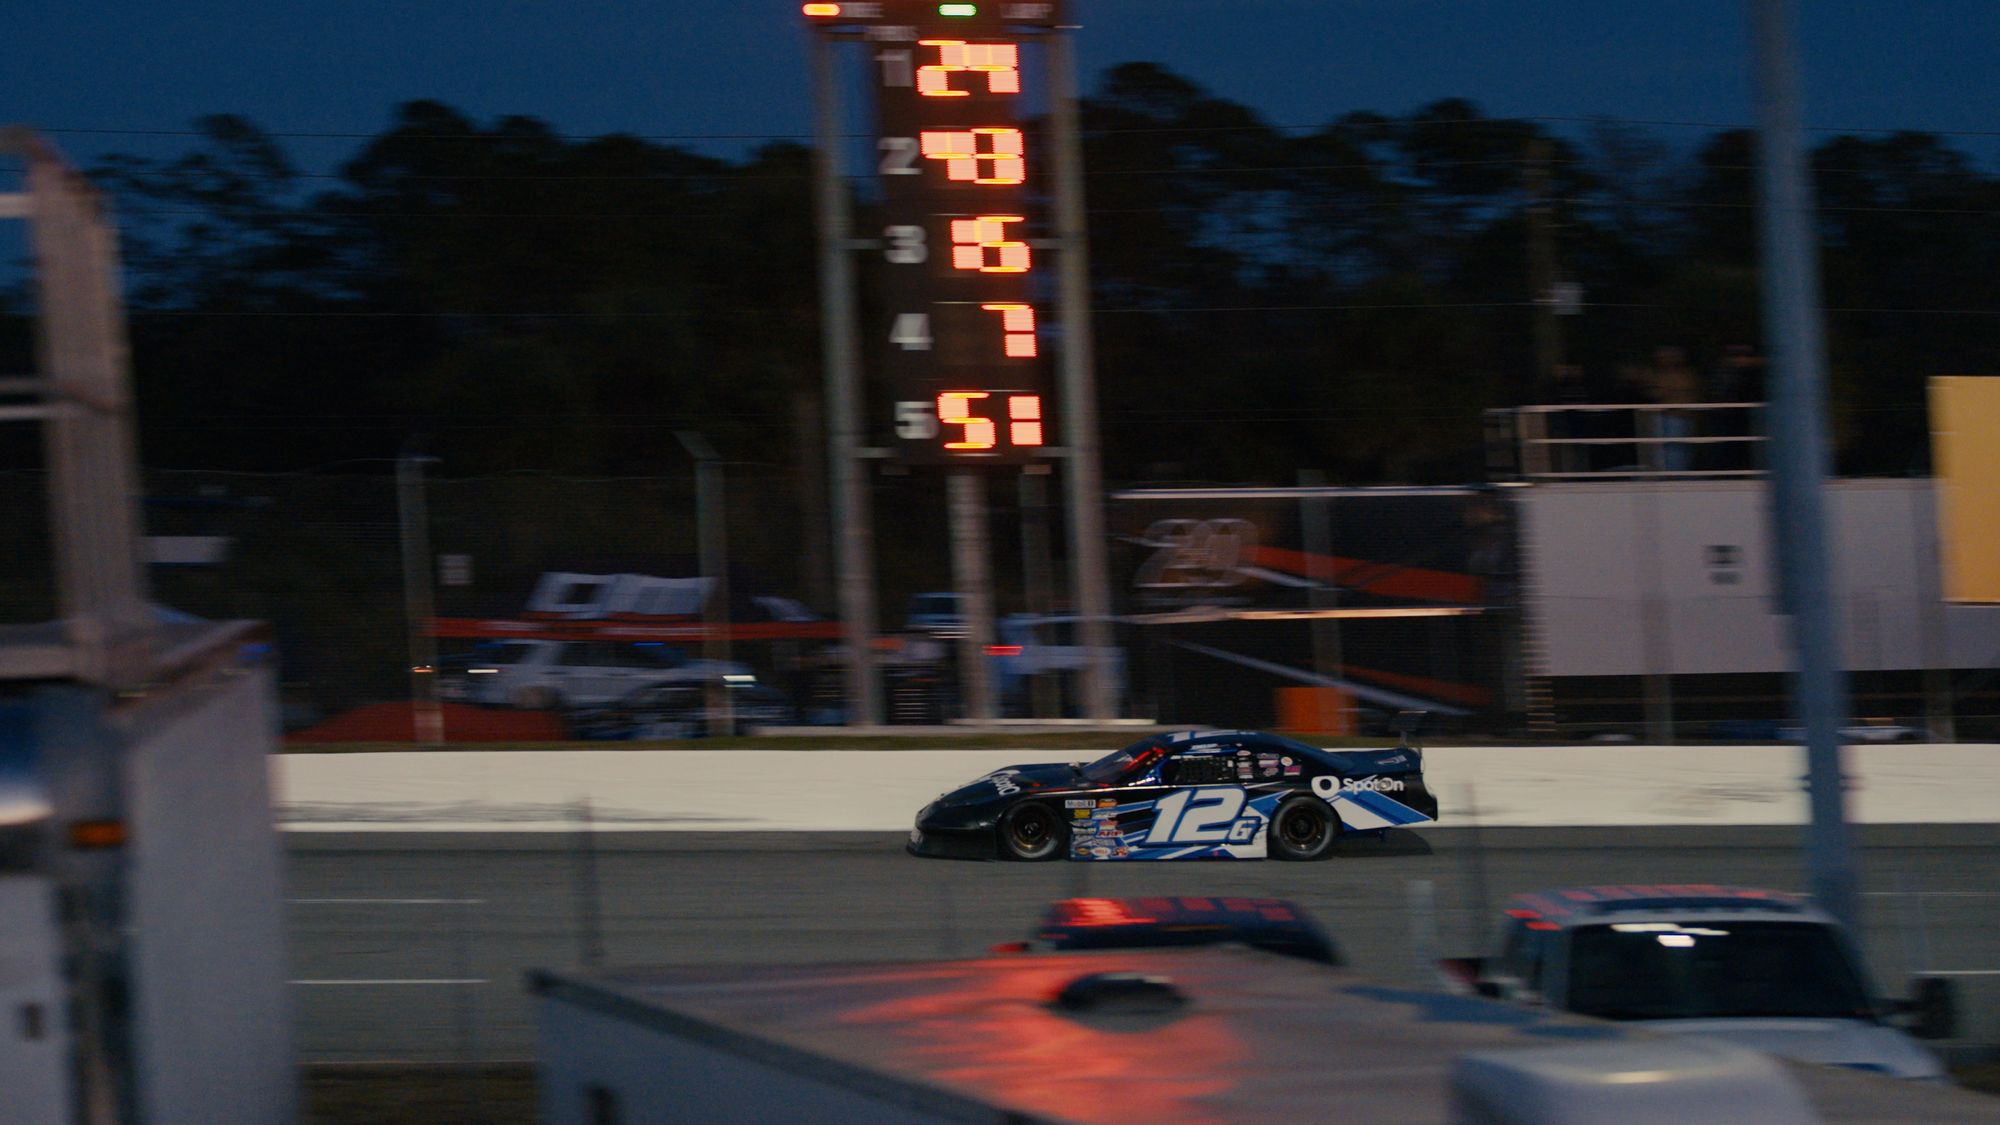 Derek Griffith speeds around the track in his #12 Super Late Model race car